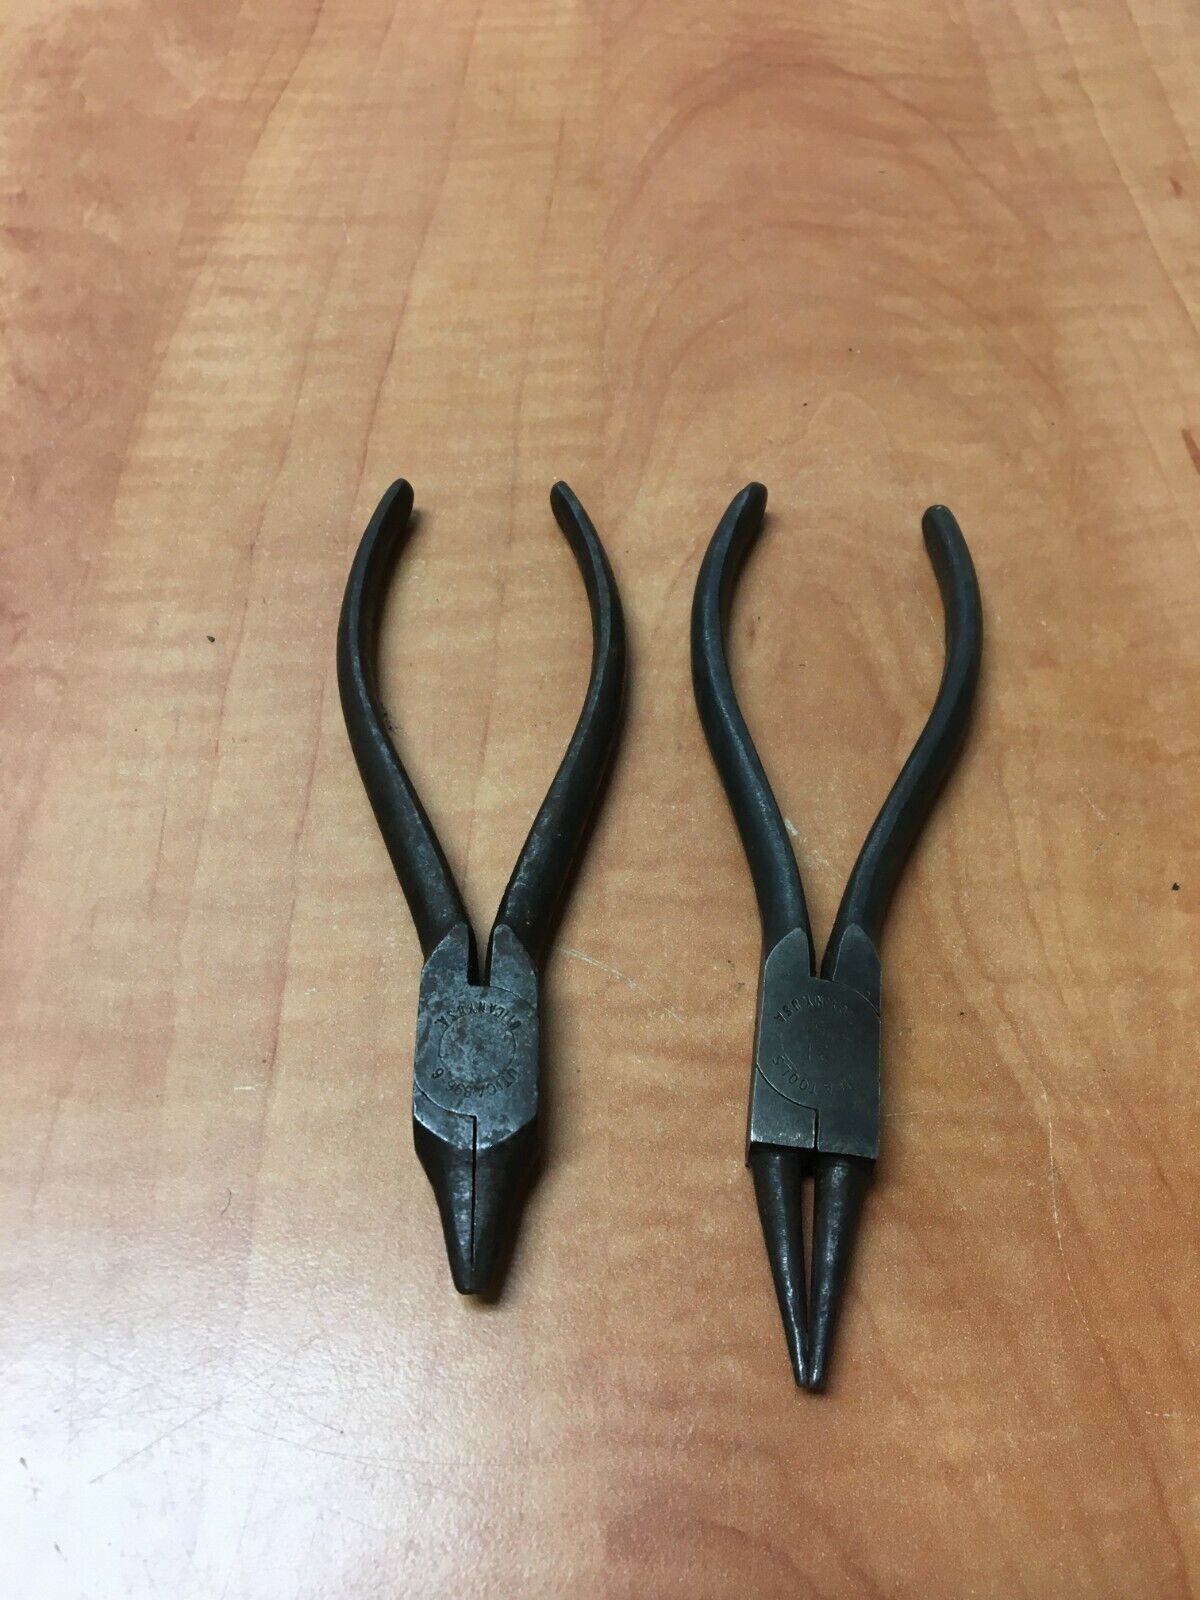 VINTAGE UTICA 896-6 Duck Bill  PLIERS & Round Nose 21-5 Pliers USA Lot of 2